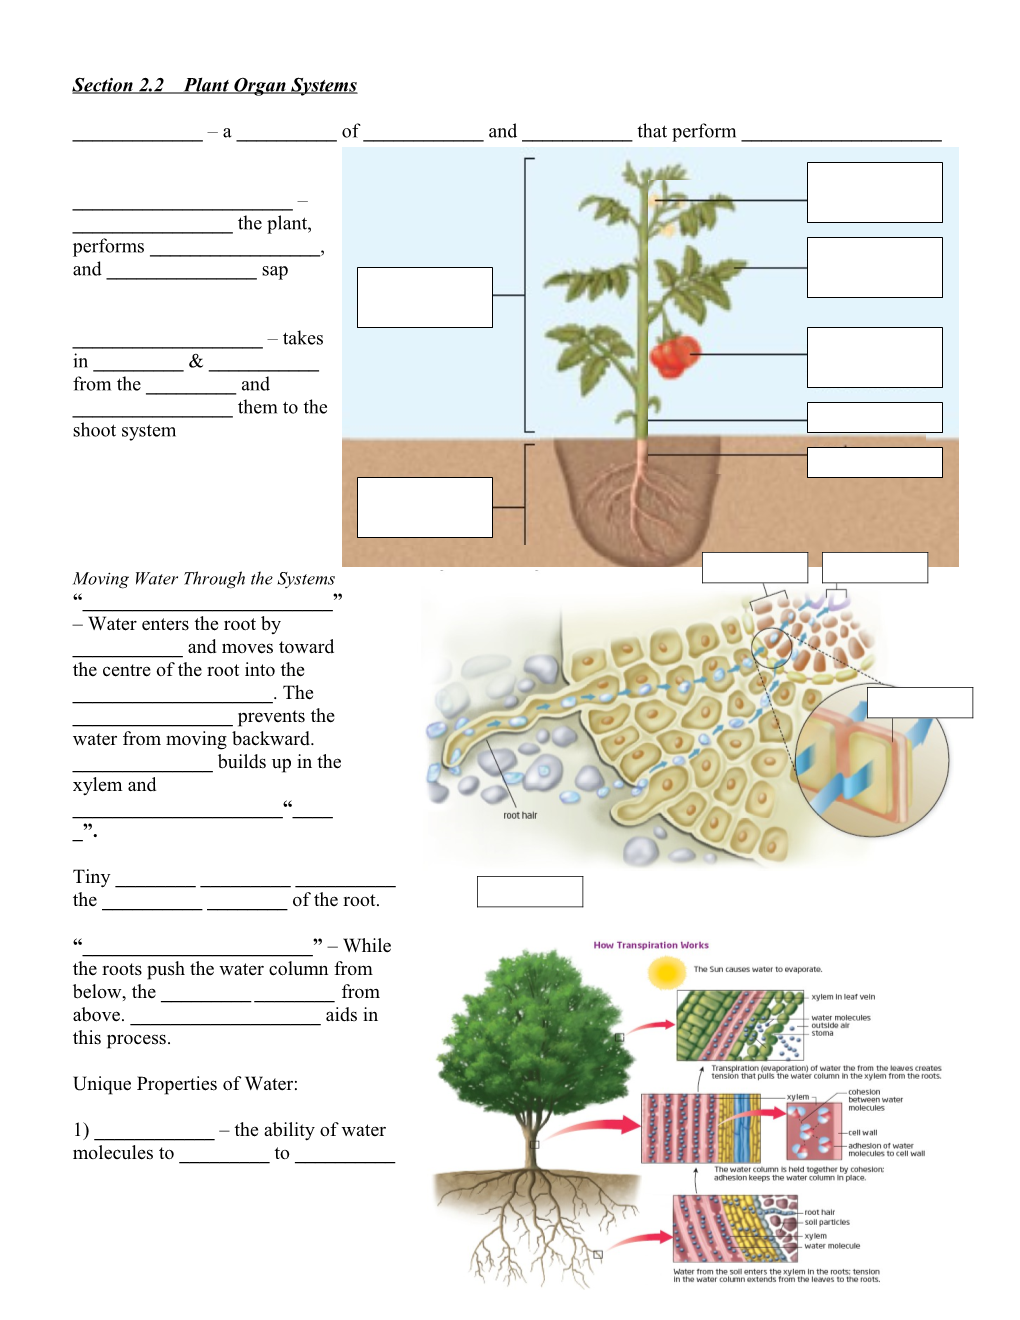 Section 2.2 Plant Organ Systems